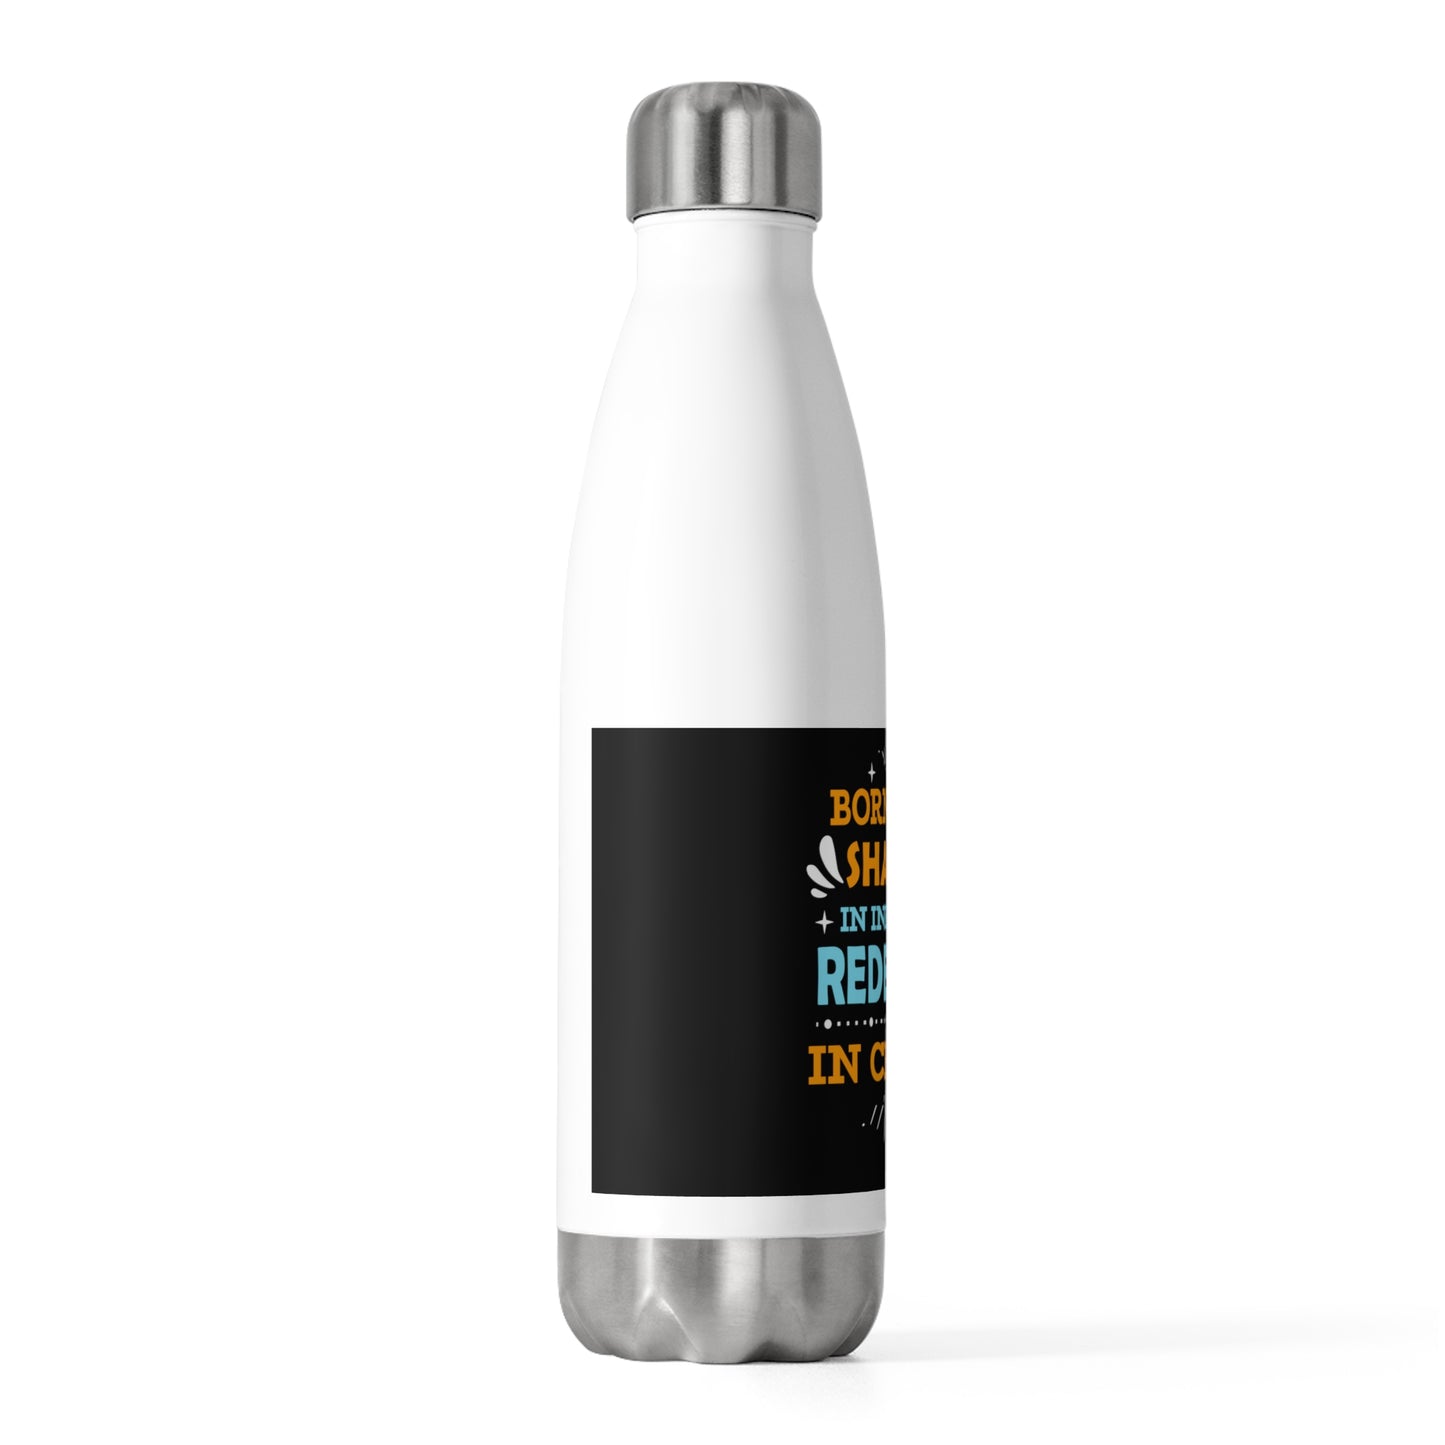 Born In Sin Shaped In Inequity Redeemed In Christ Insulated Bottle